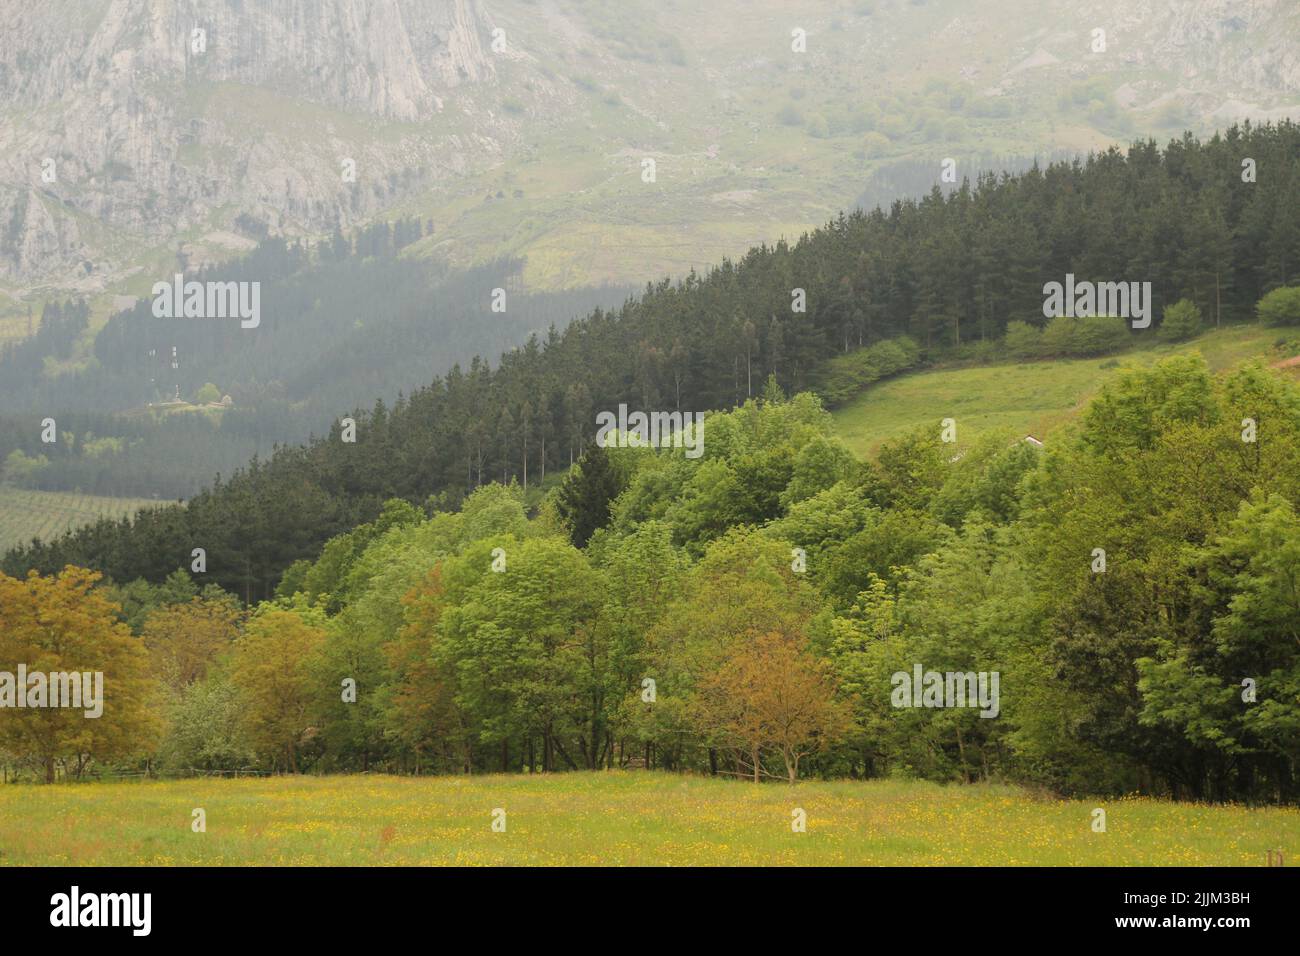 A landscape of vast trees on a hilly terrain in the countryside Stock Photo